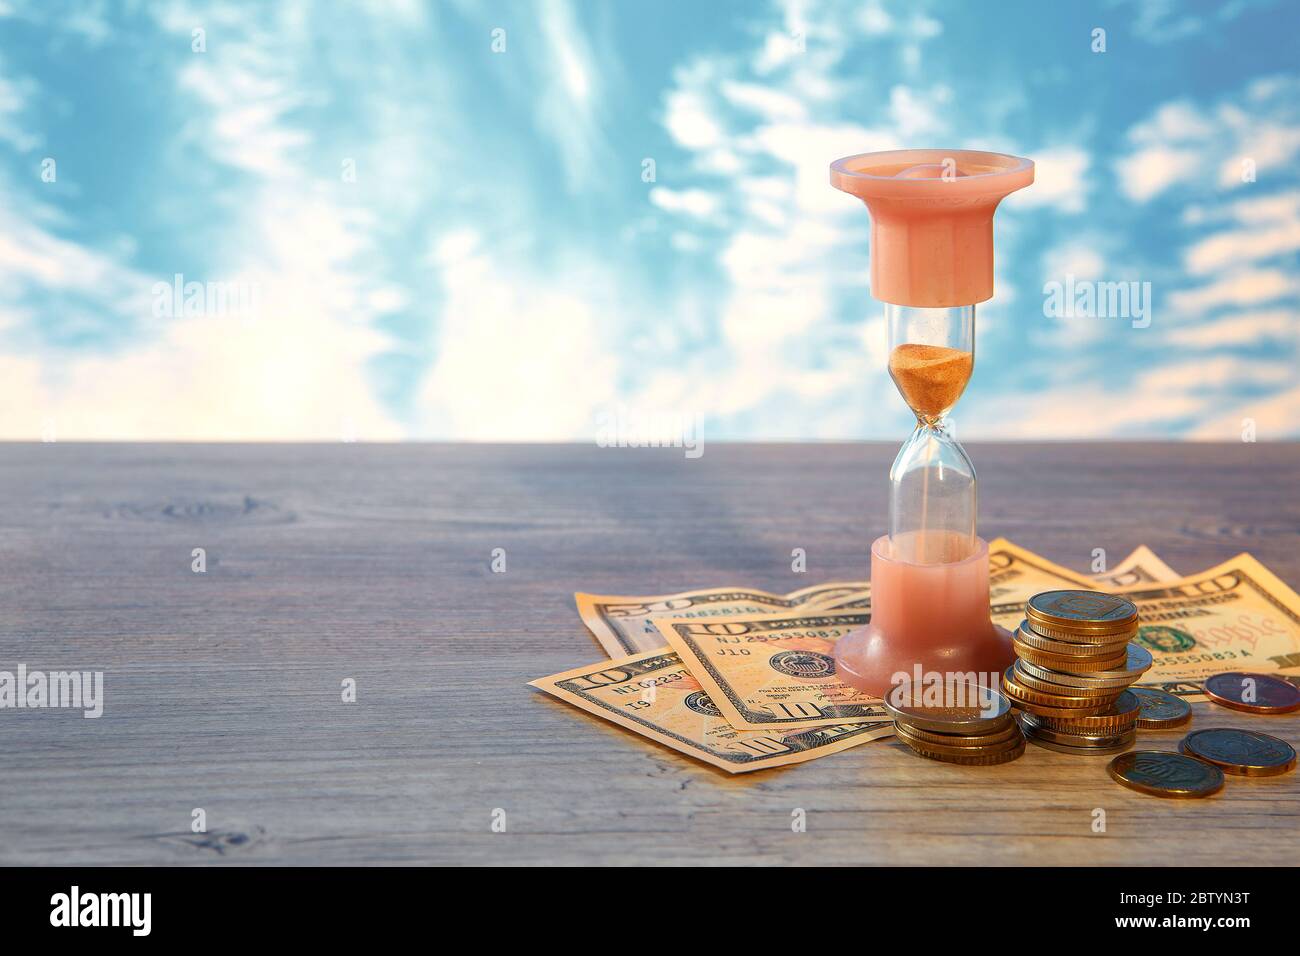 Time is money. Financial concept of money with a clock and coins of different countries. Hourglass. Stock Photo